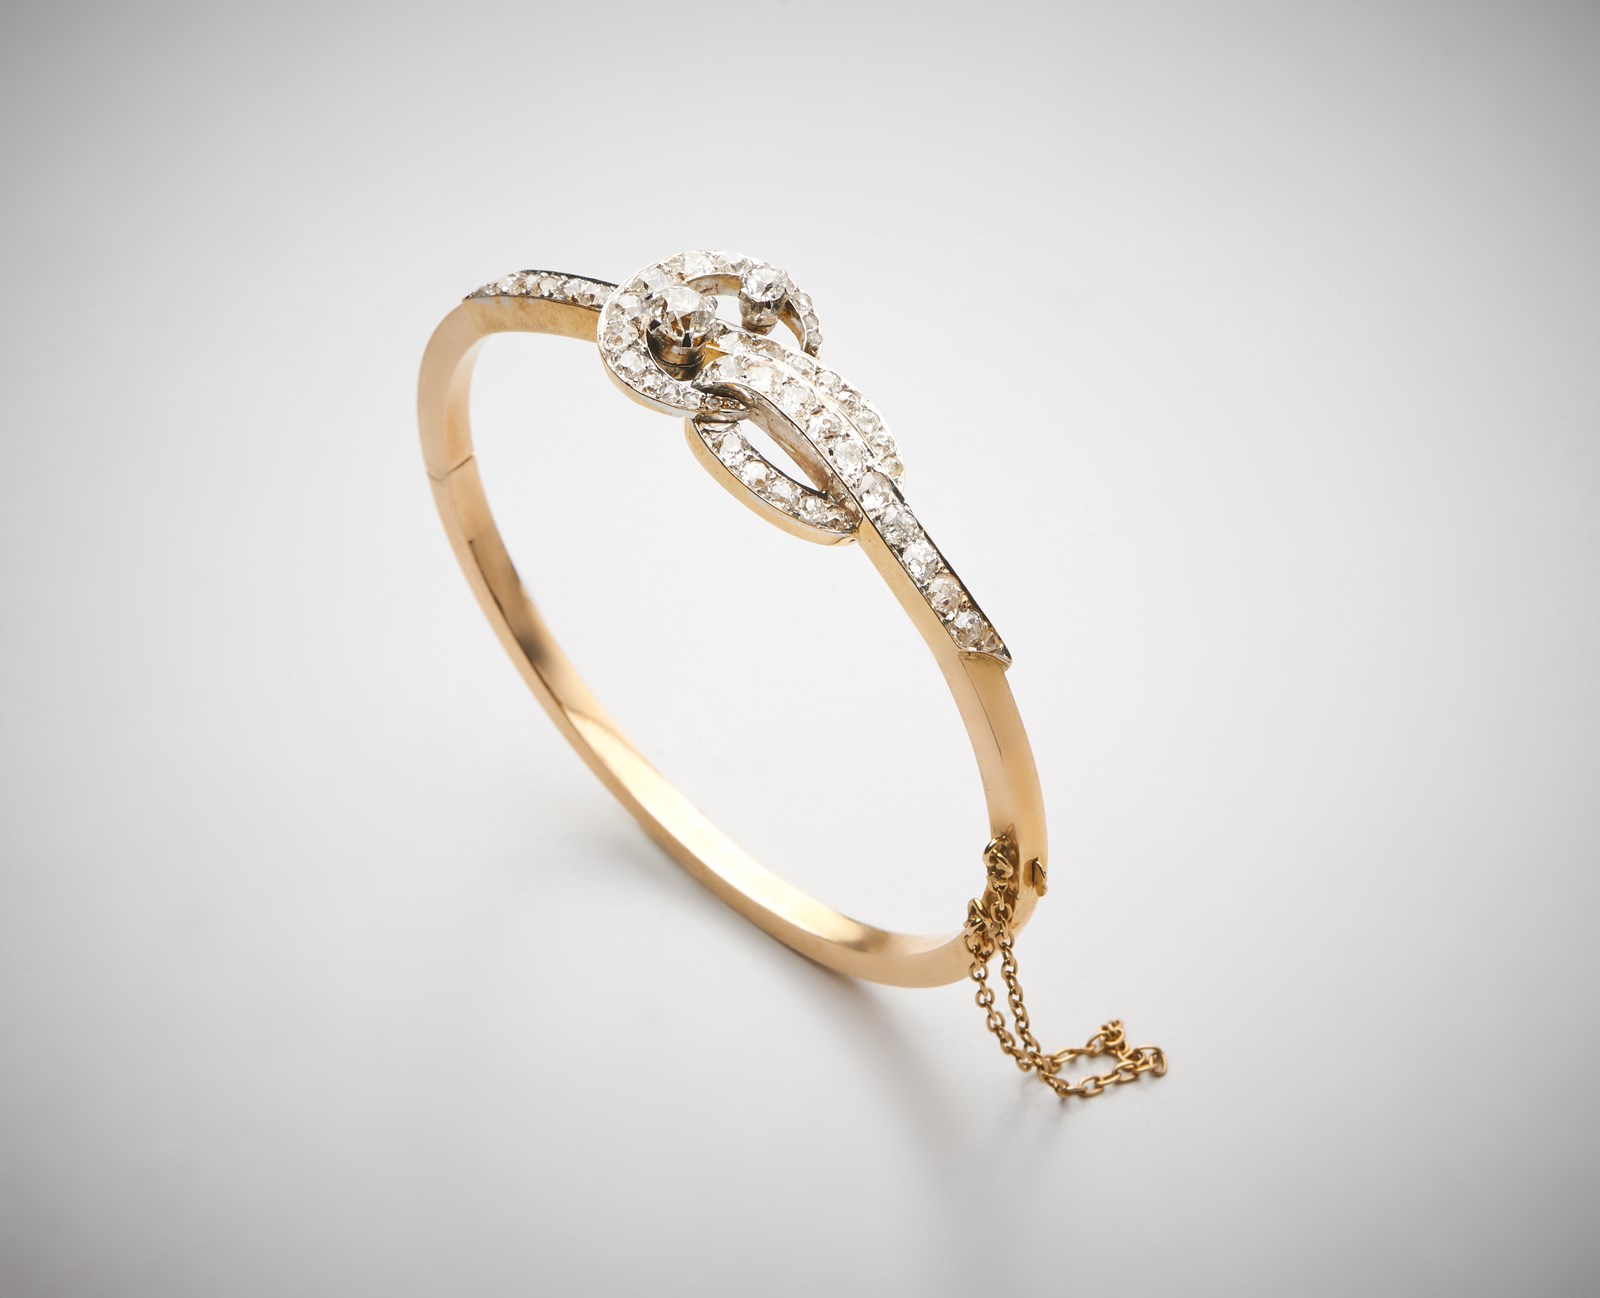 Rigid cuff bracelet in yellow gold 750/1000 with diamonds antique cut of 5 ct. total approx.  (. )